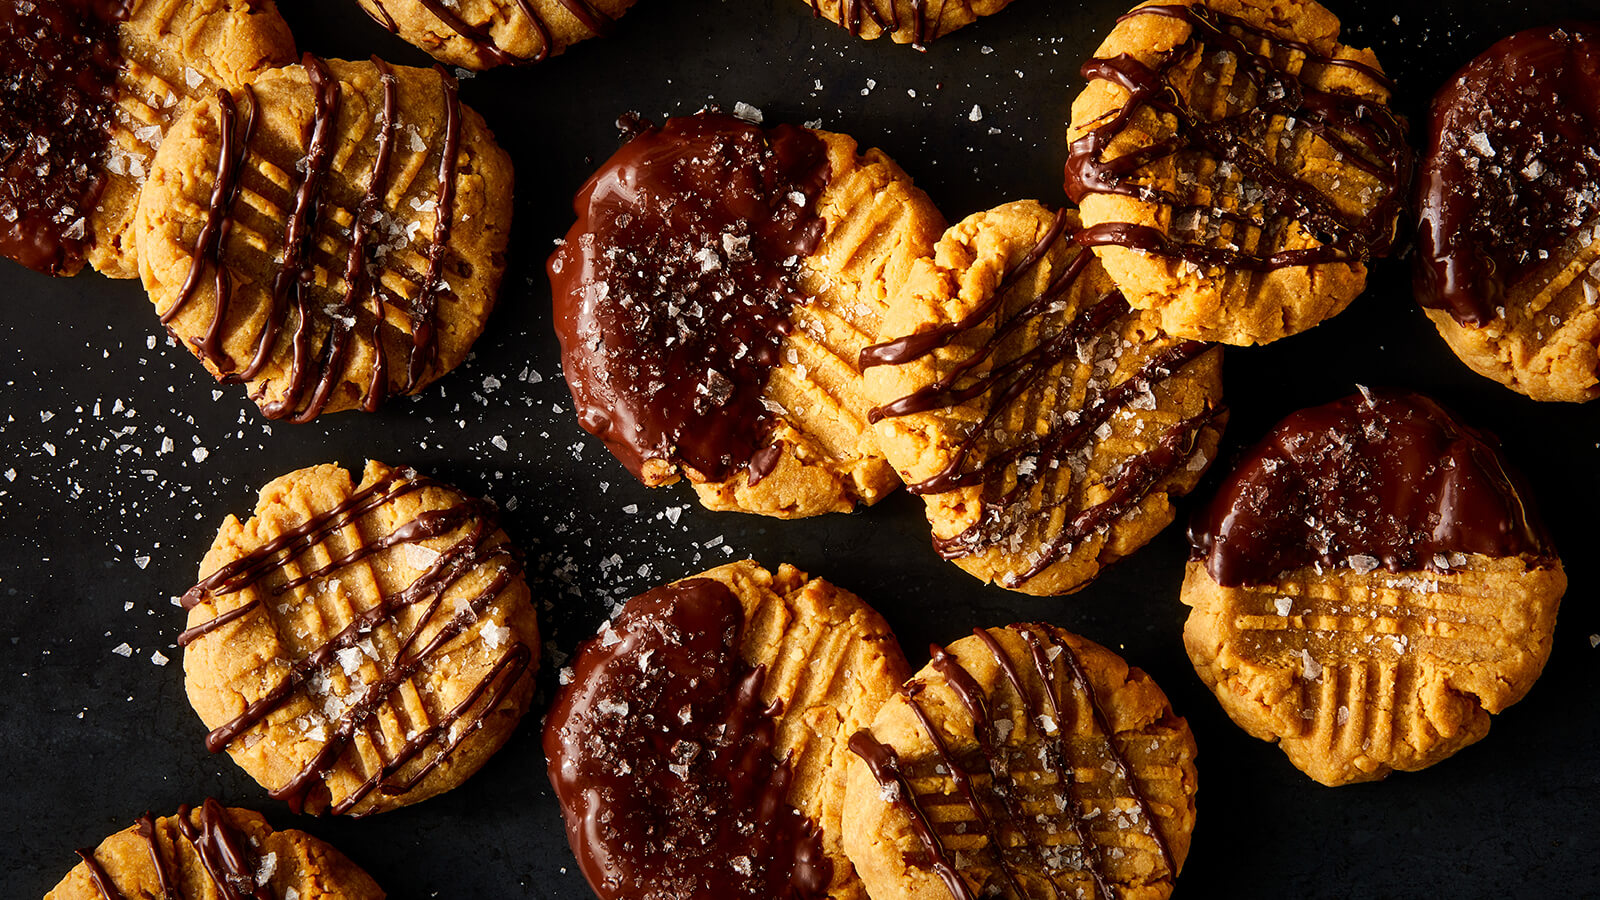 Flourless Peanut Butter Cookies with Chocolate Drizzle